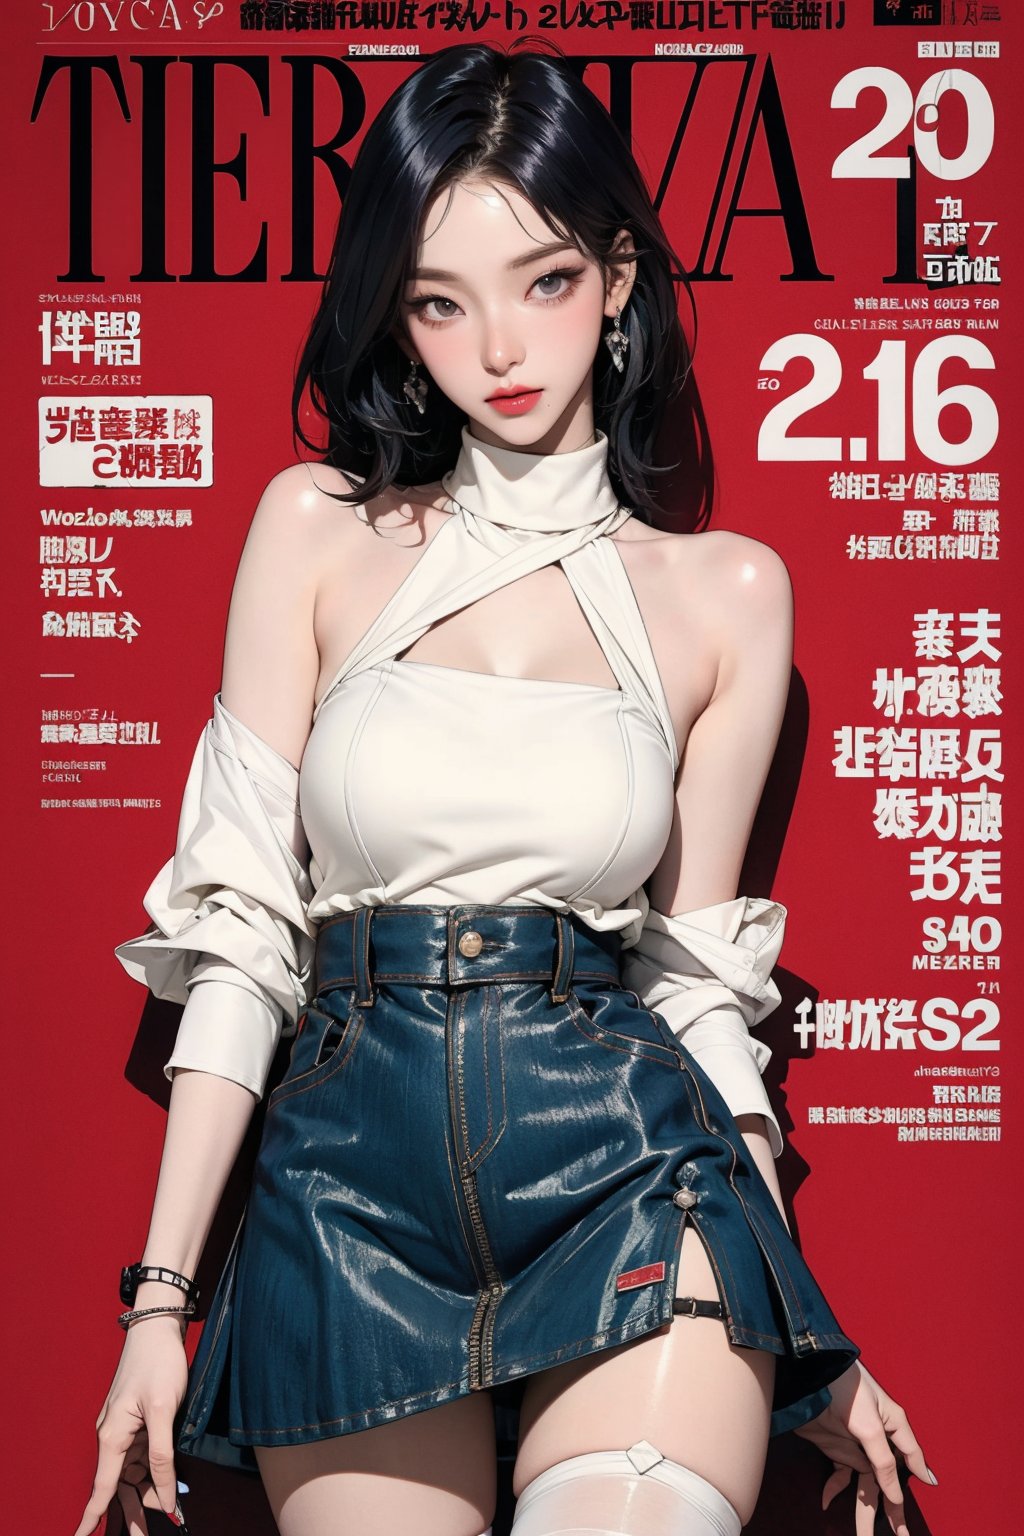 1girl, different styled shirt, skirt, stockings, bracelets, turtleneck shirt,  bare shoulders, thigh up body, looking at viewer, hairstyle, dyed hair, aespakarina, earrings, intricate background, chimai,magazine cover